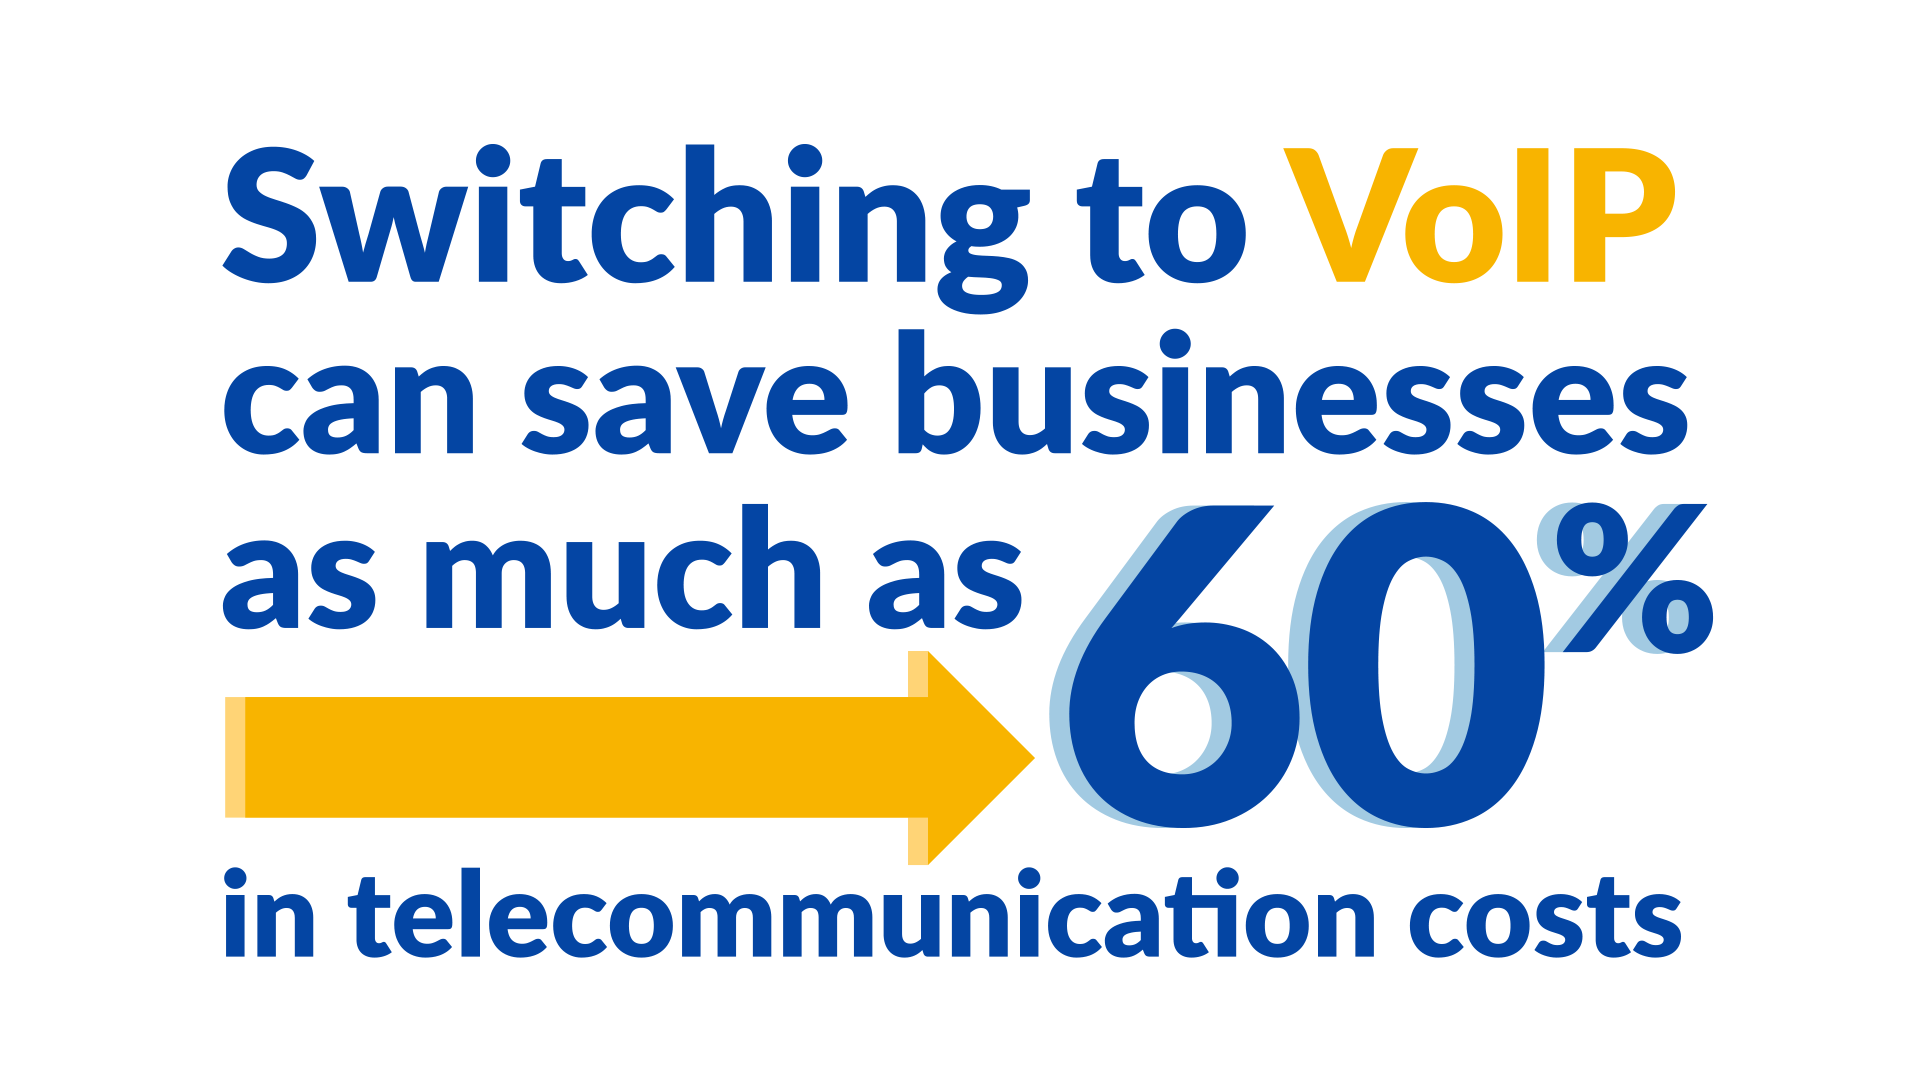 Switching to VoIP saves costs